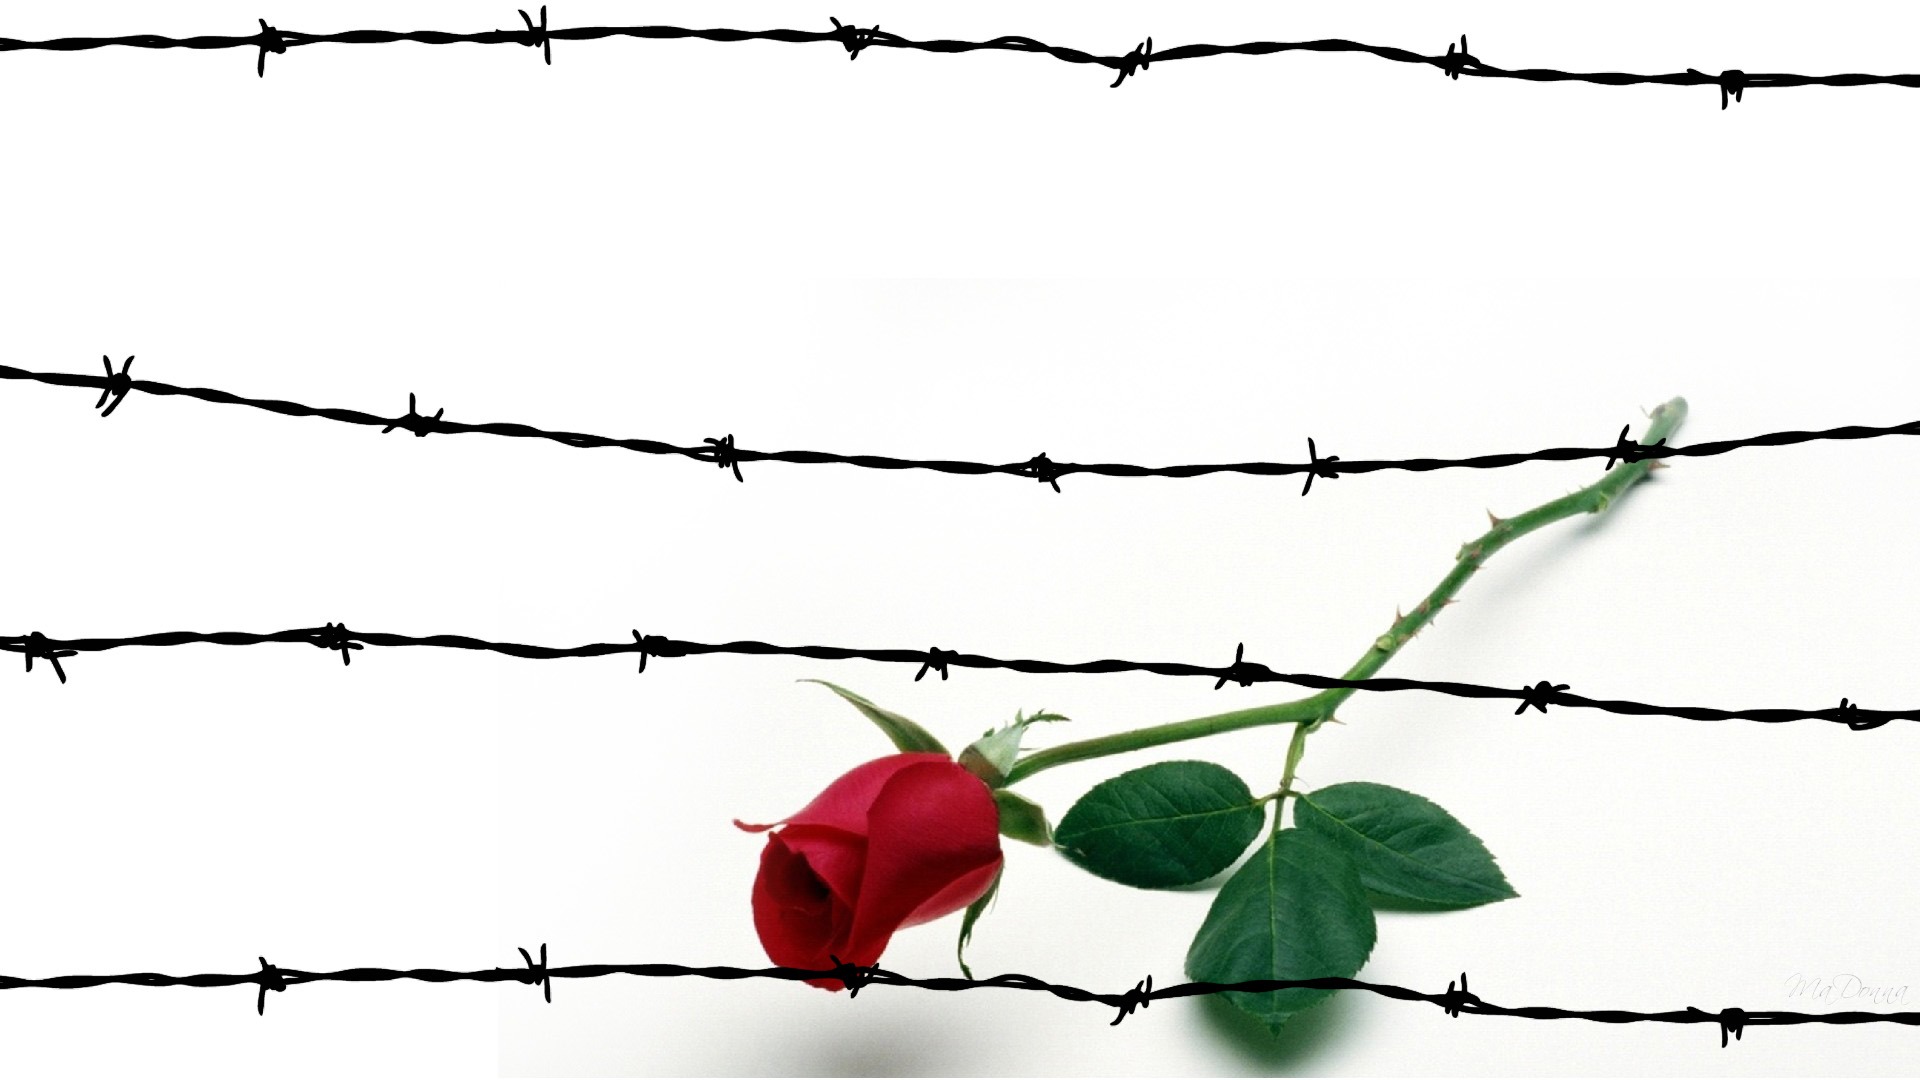 Barbed Wire Cartoon - ClipArt Best - ClipArt Best